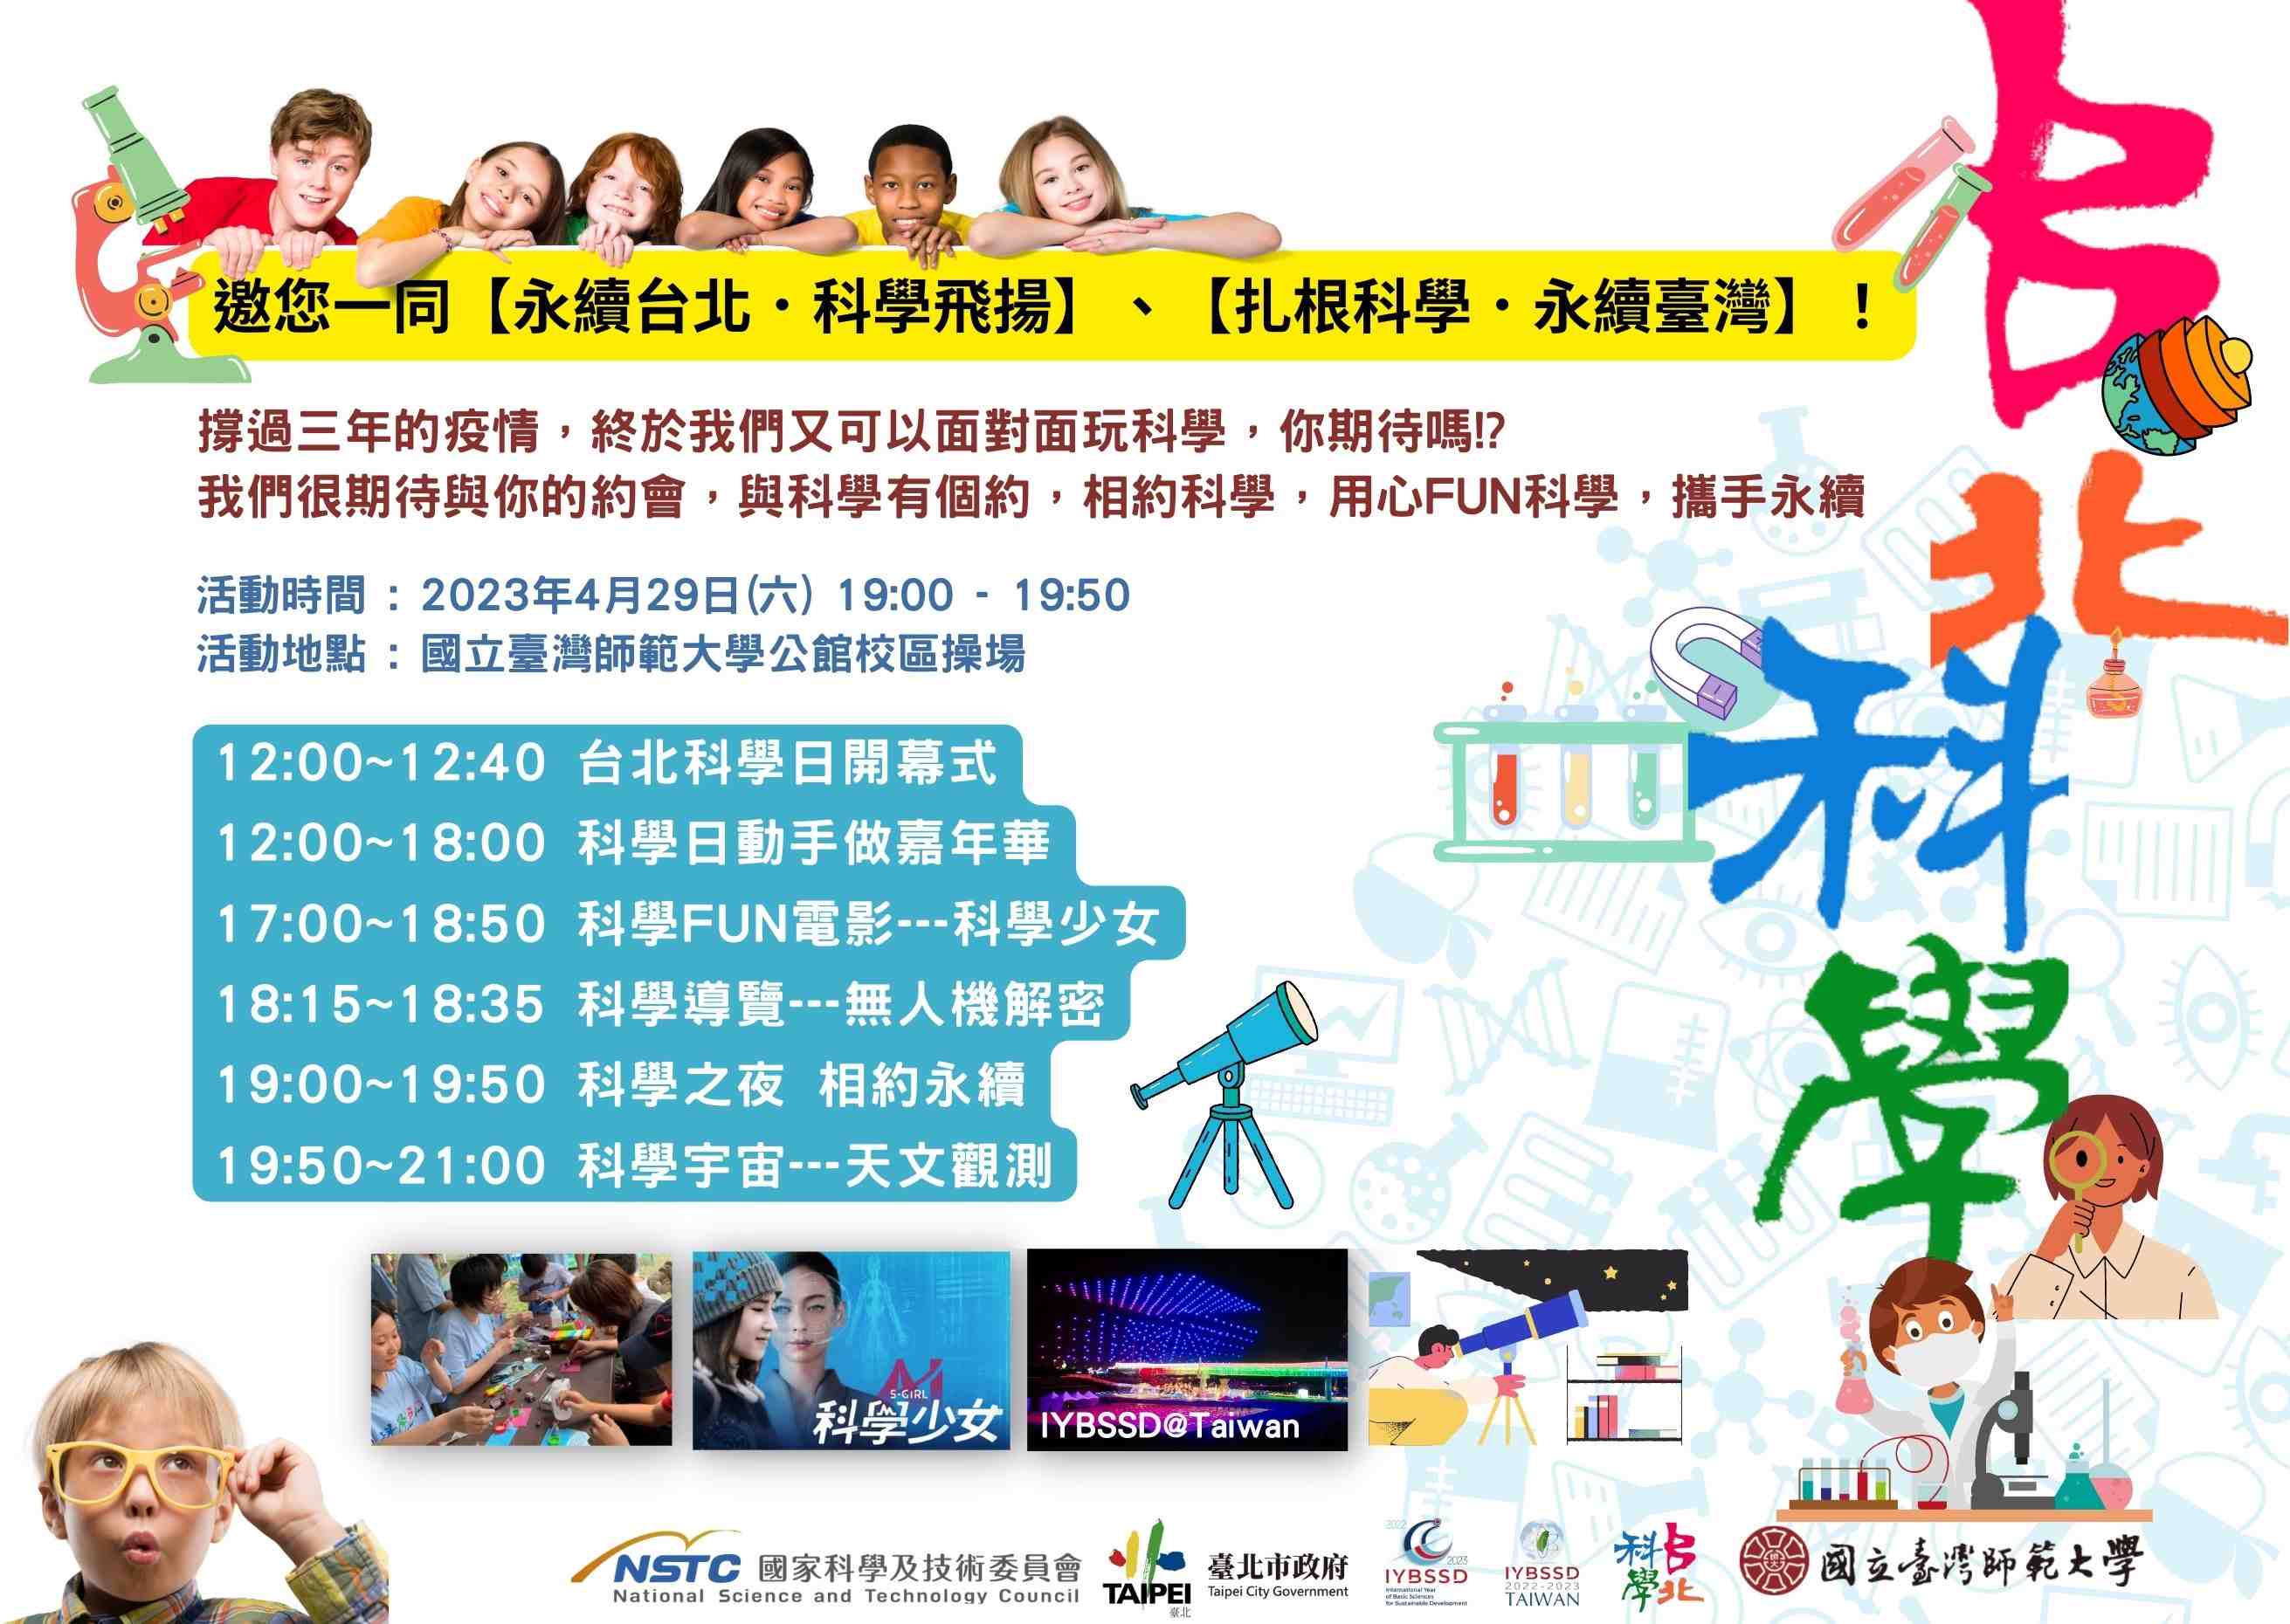 [IYBSSD@Taiwan X Taipei Science Festival] Promotional Graphics or Posters